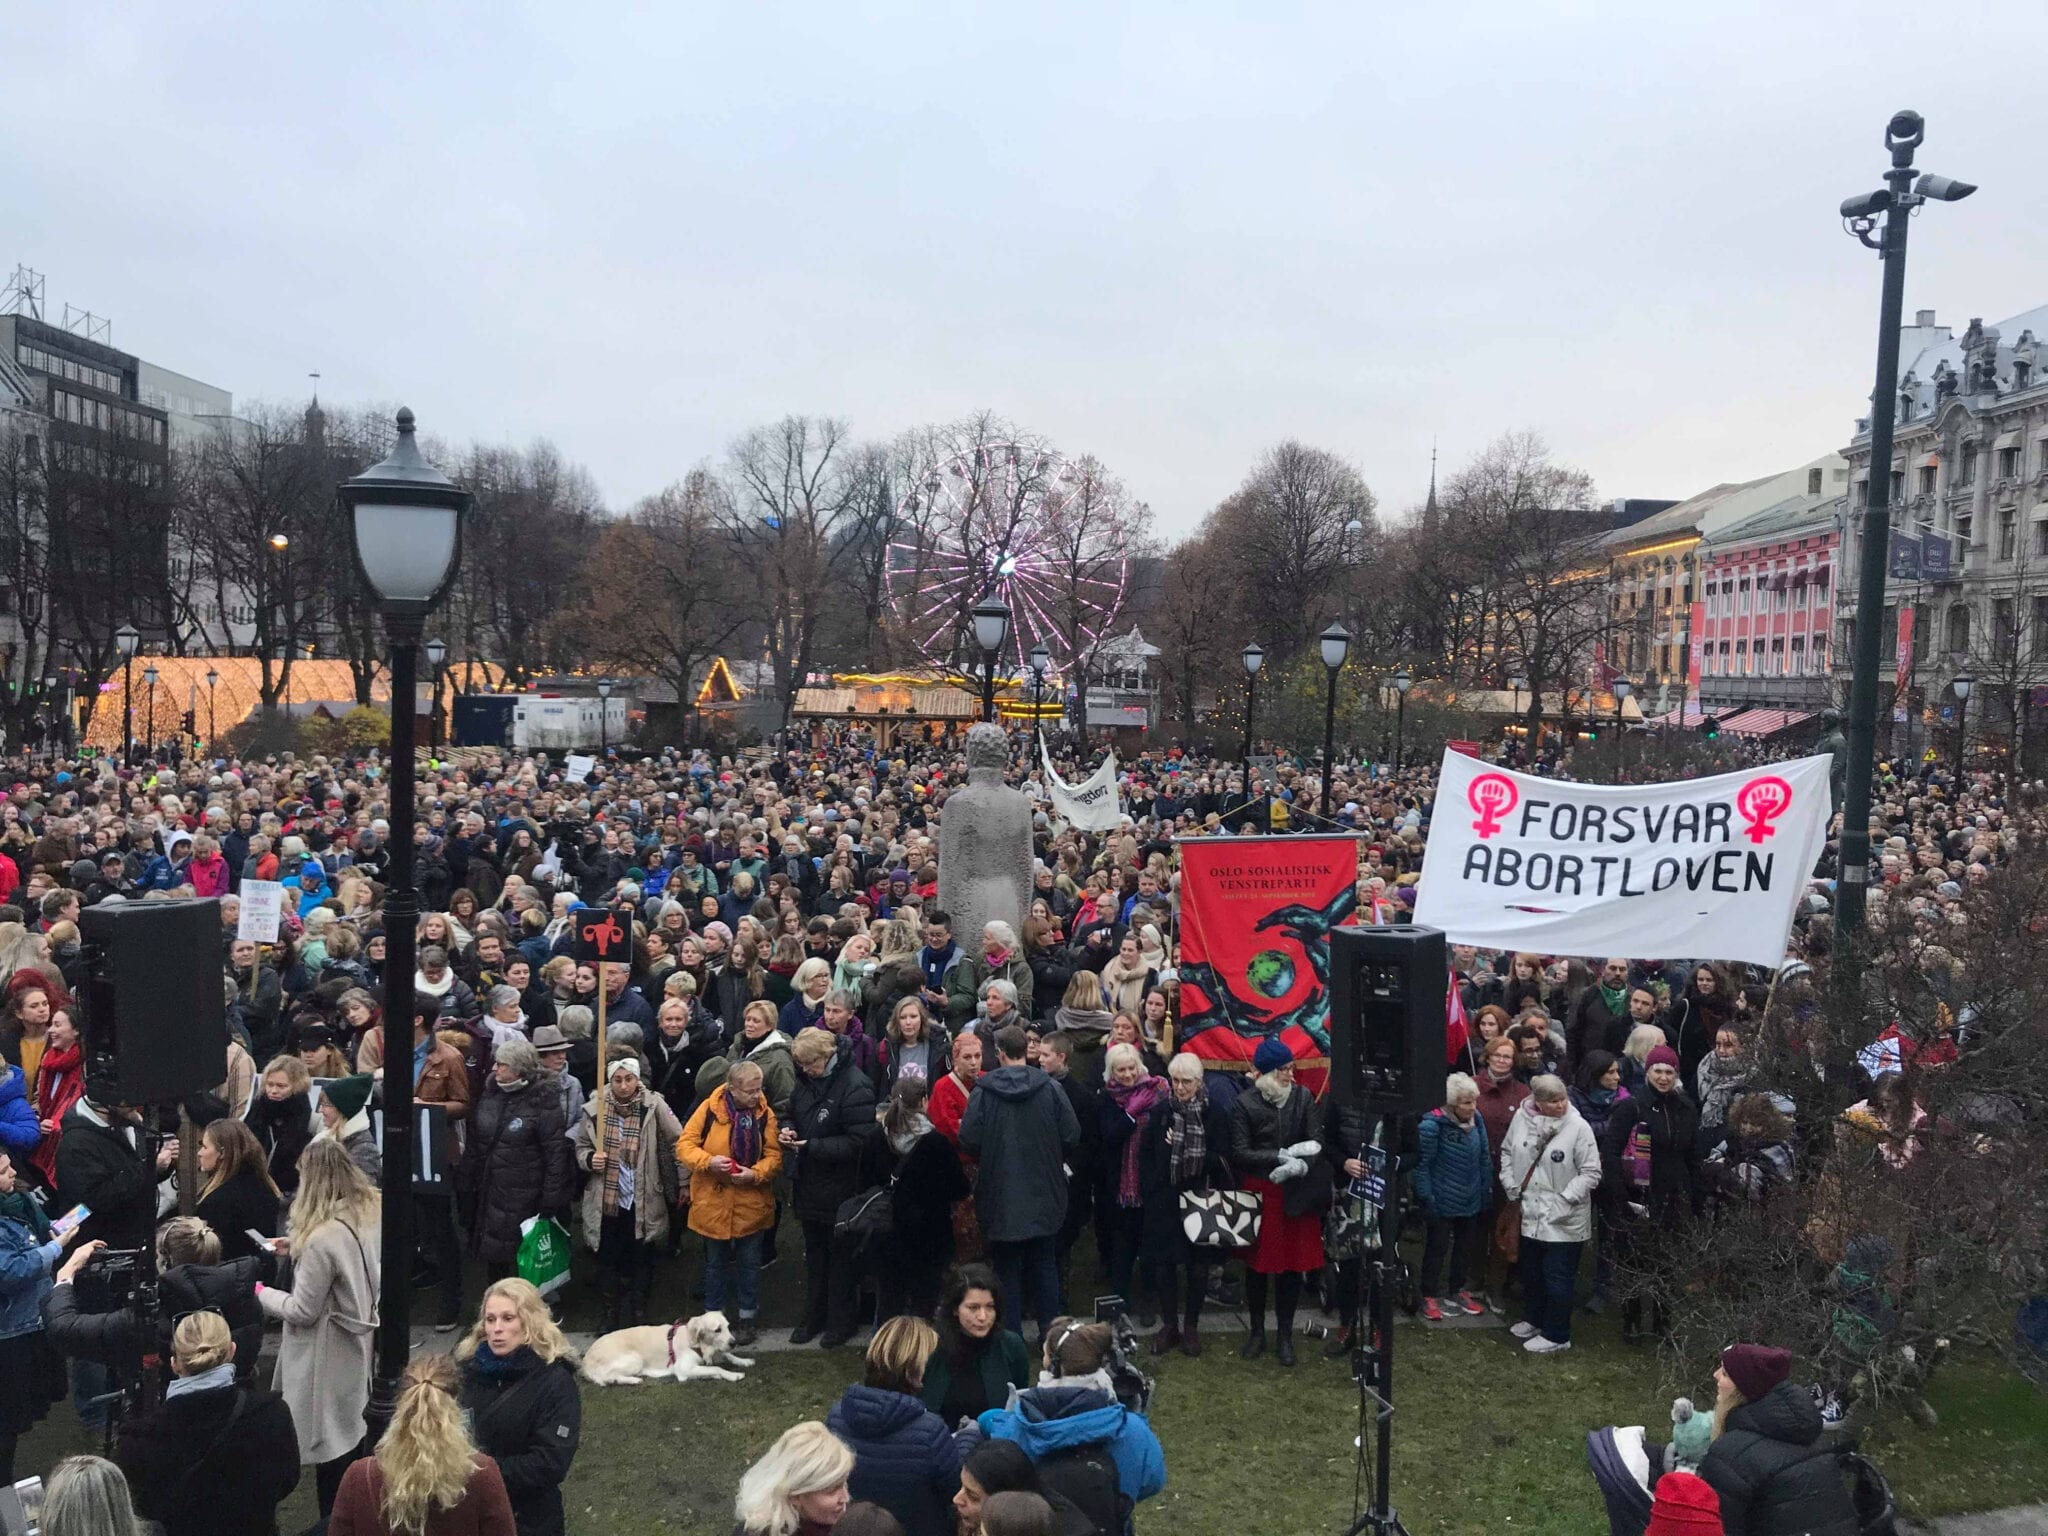 People hold placards during a demonstration against changes of the country's abortion law in Oslo, Norway November 17, 2018.